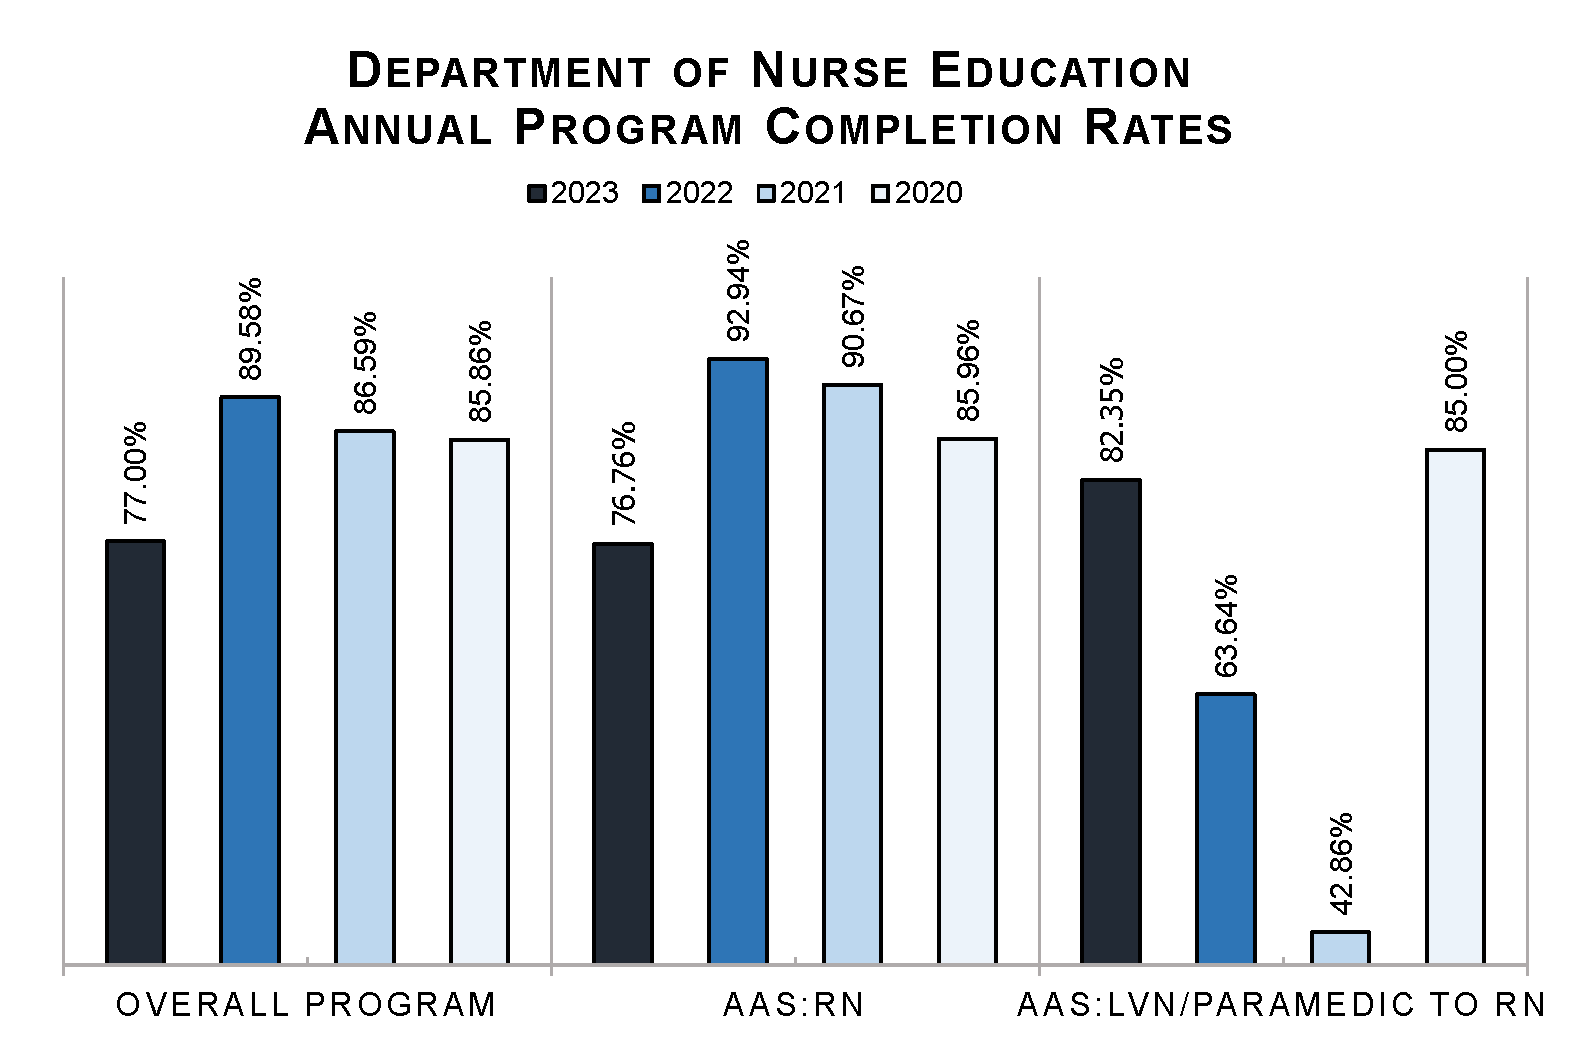 Department of Nurse Education annual program completion rates 2020-2023